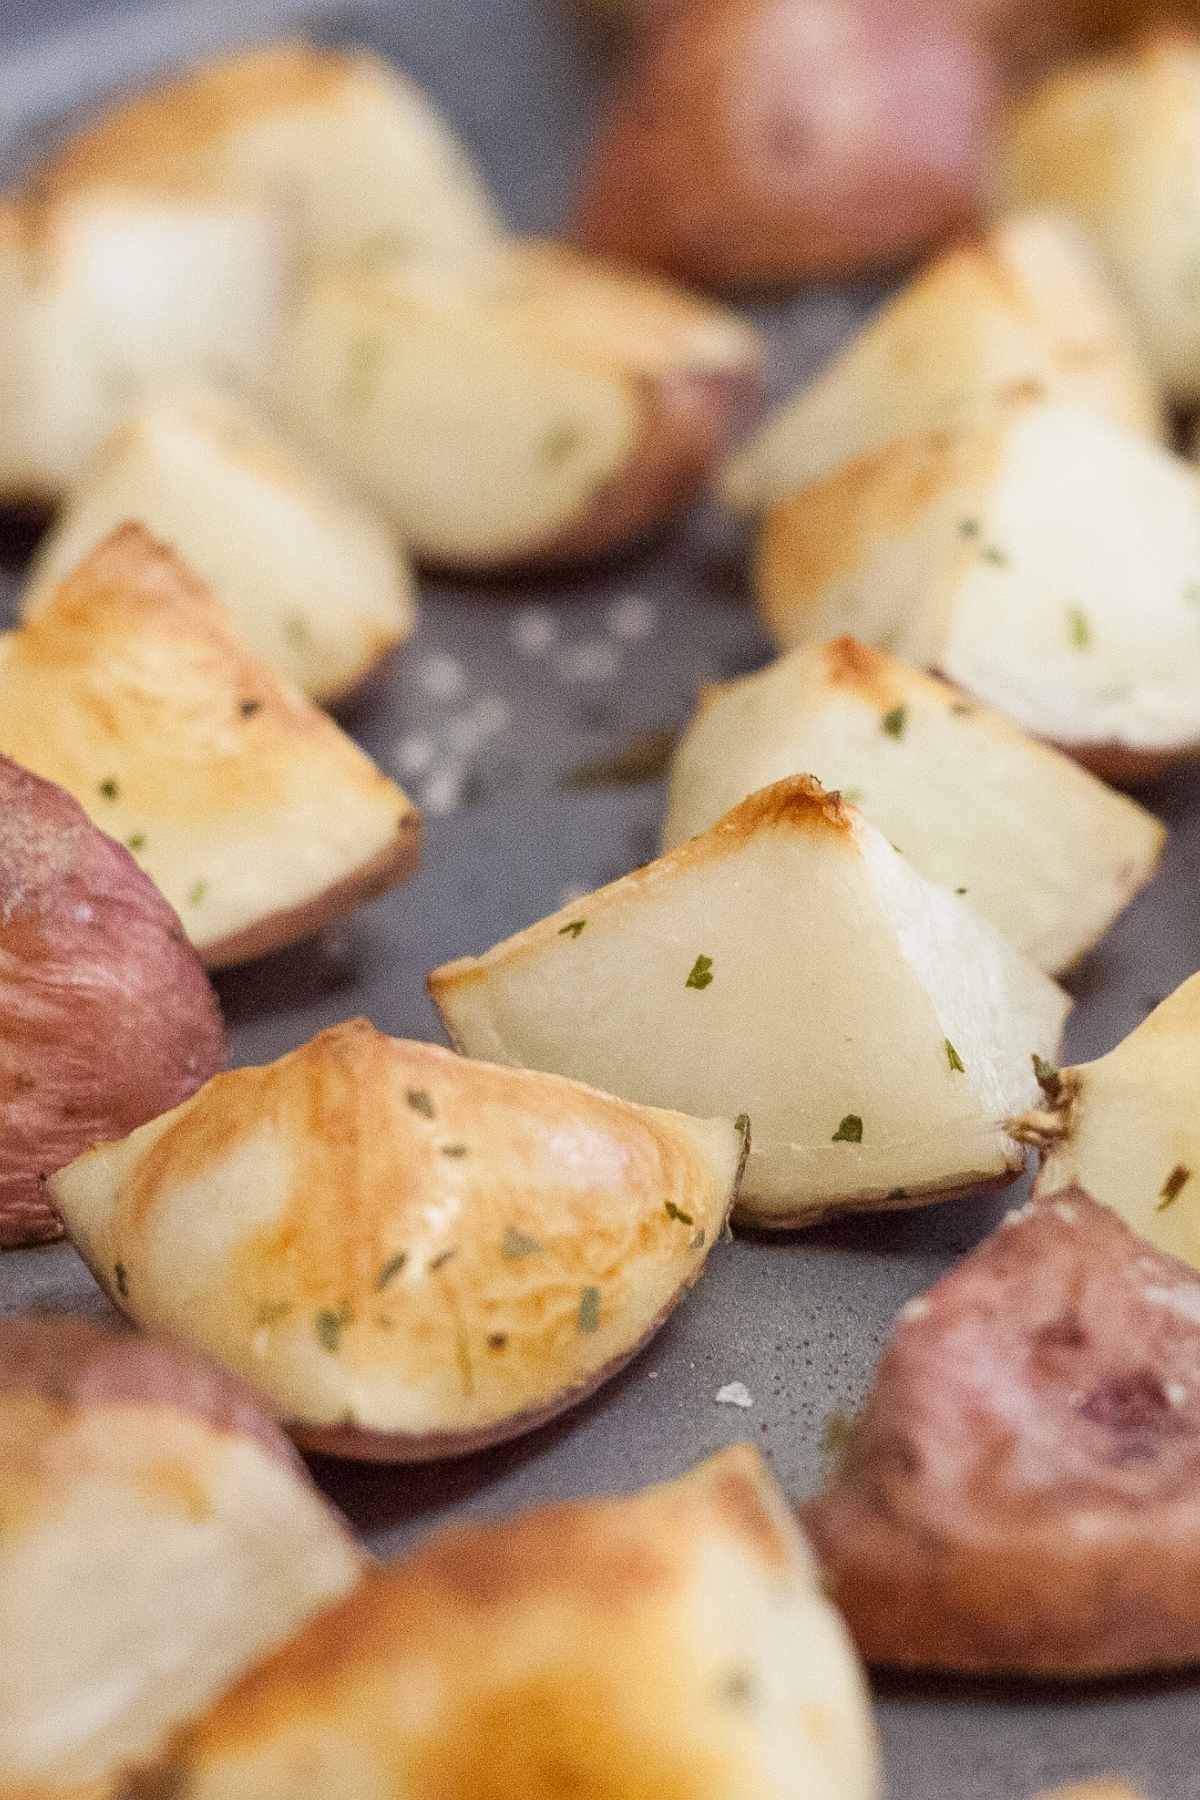 Roasted White Potatoes are a favorite side dish with just about everyone! They’re creamy on the inside, crispy on the outside, and pair well with other veggies and meat.